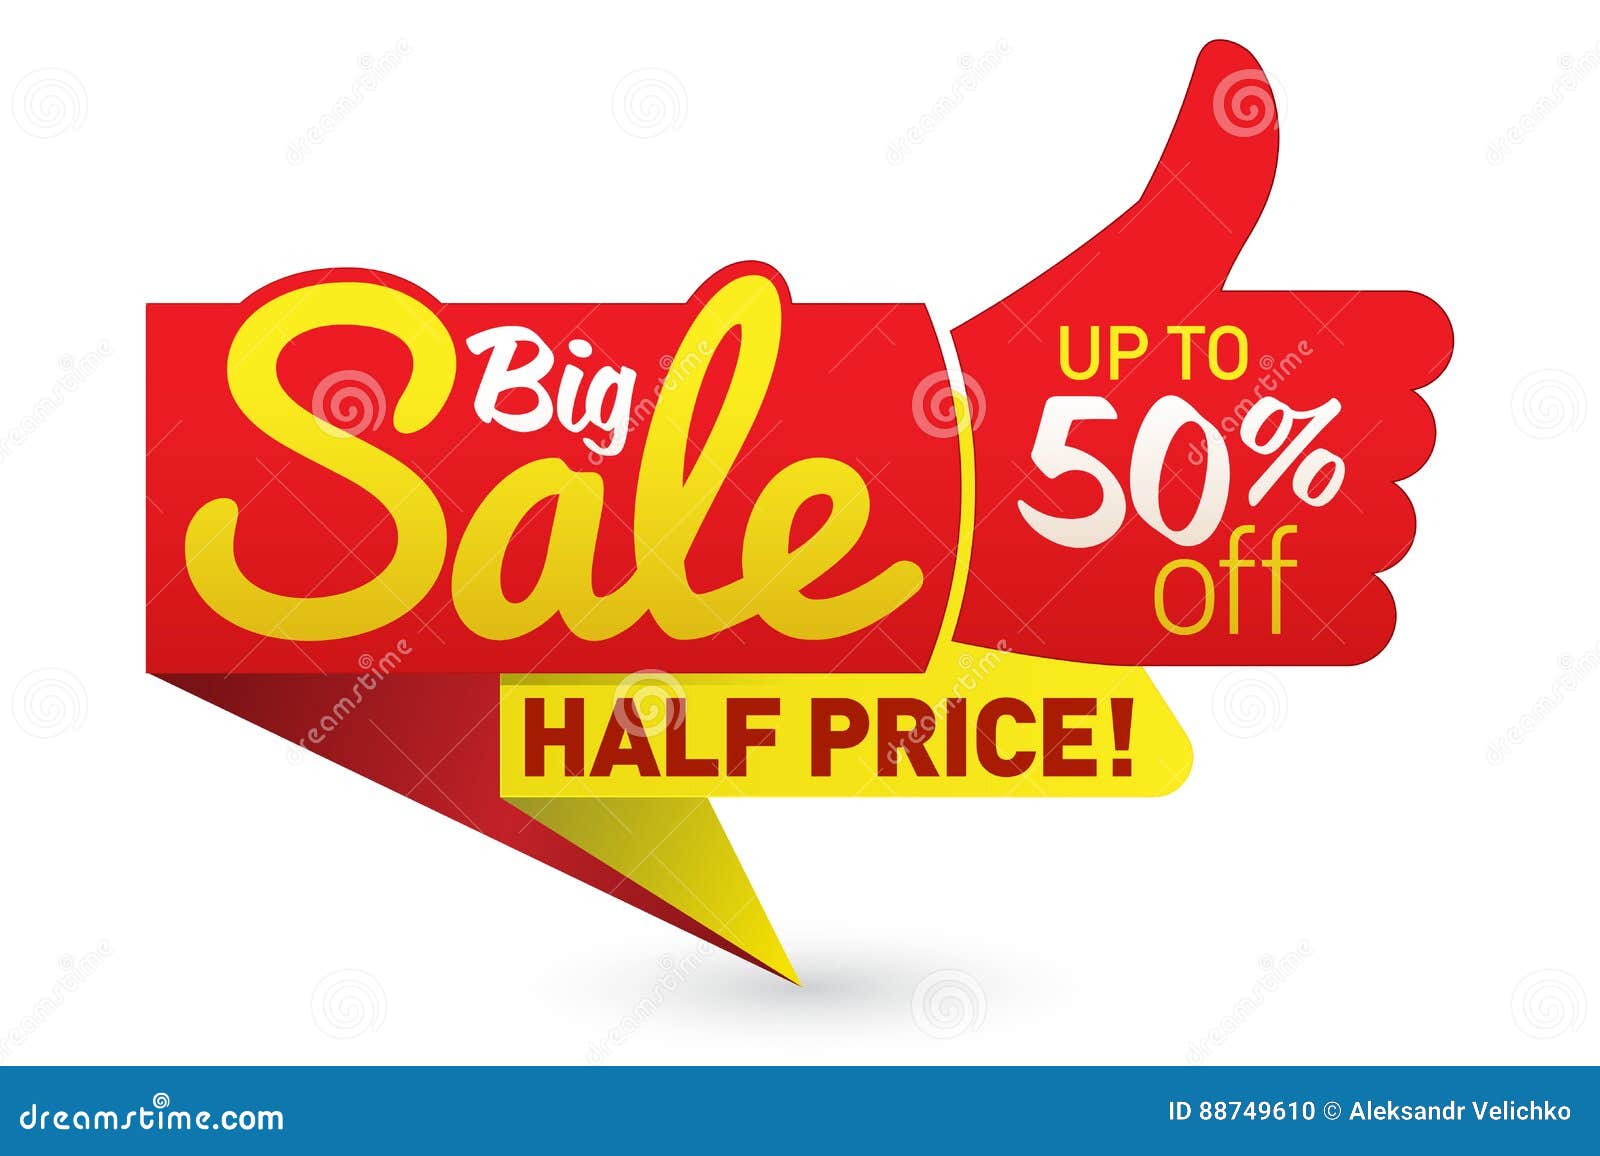 big sale price offer deal  labels templates stickers